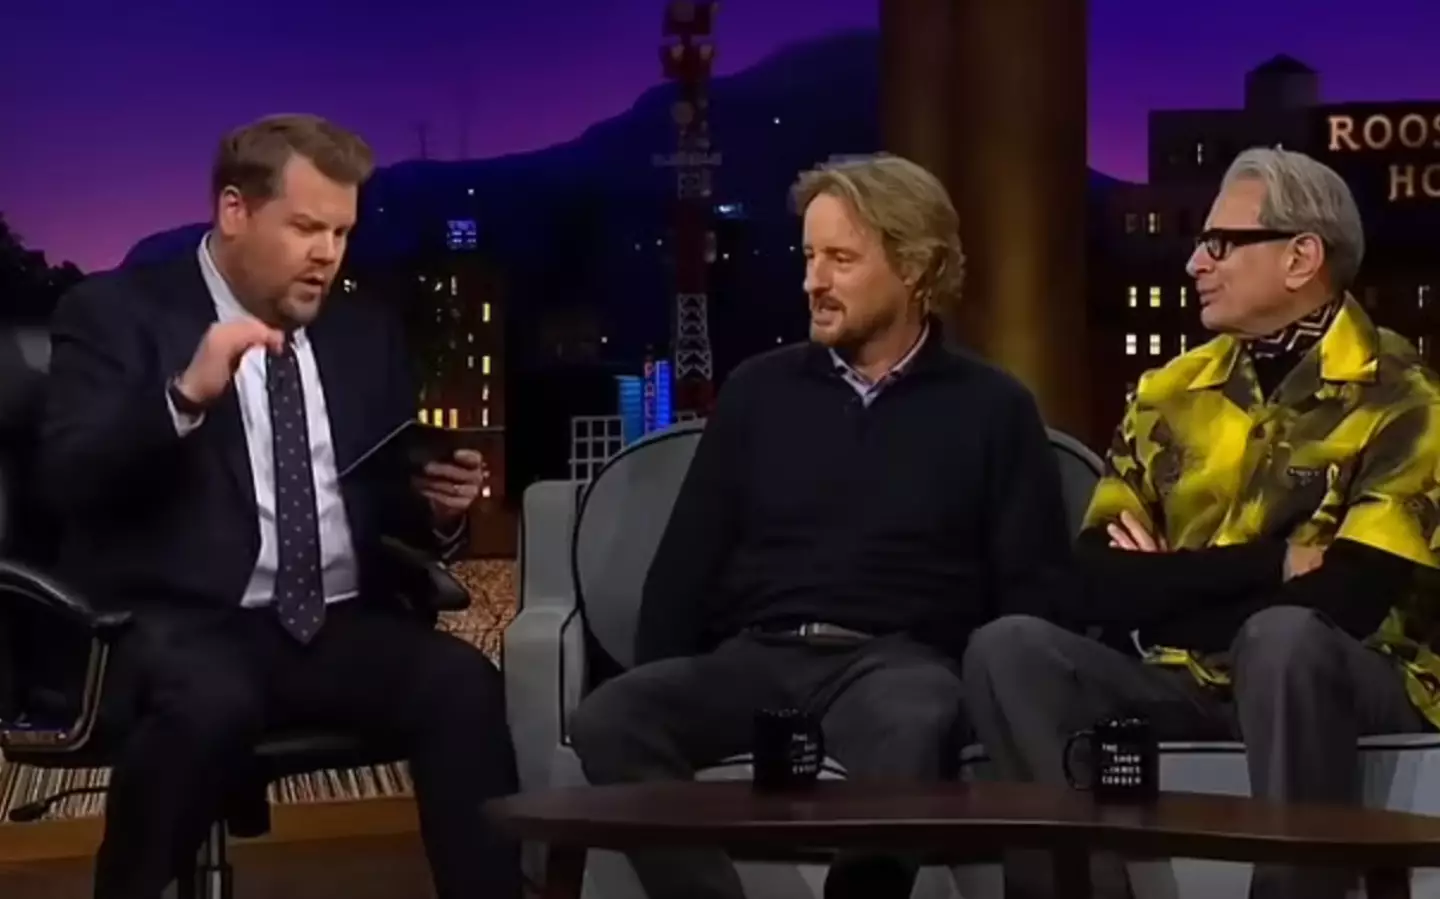 Owen Wilson recounted the tale on The Late Late Show with James Corden.